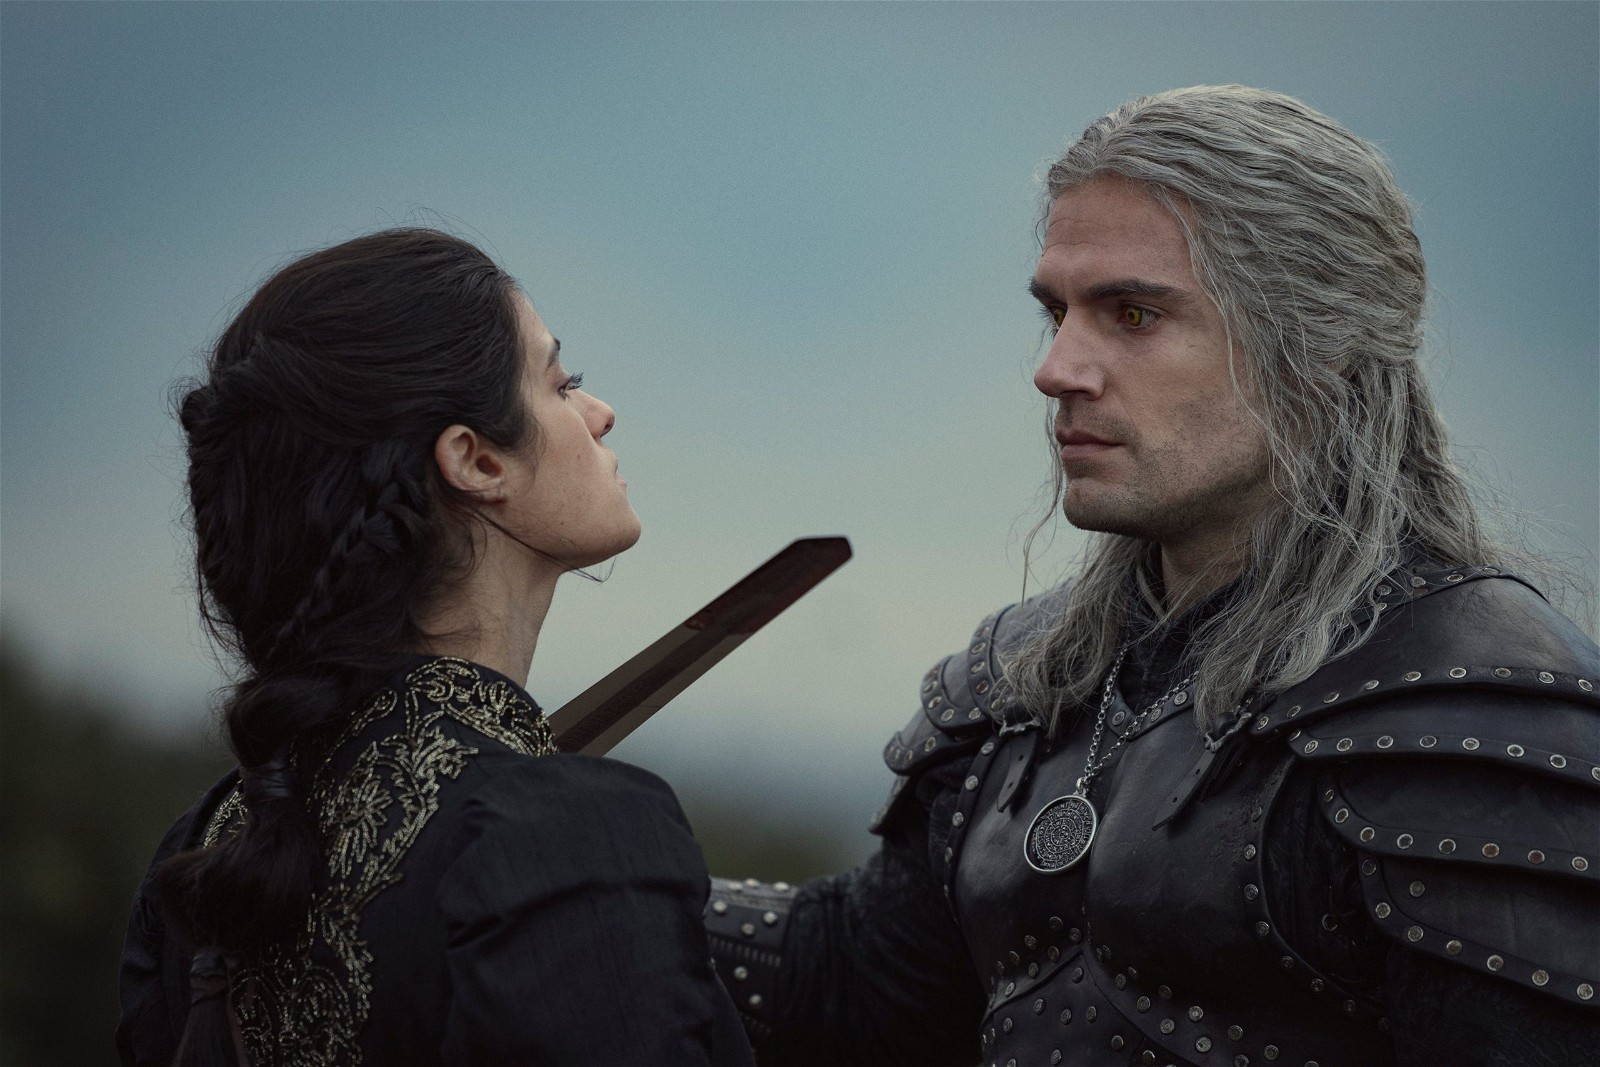 The Witcher – Yennefer and Geralt